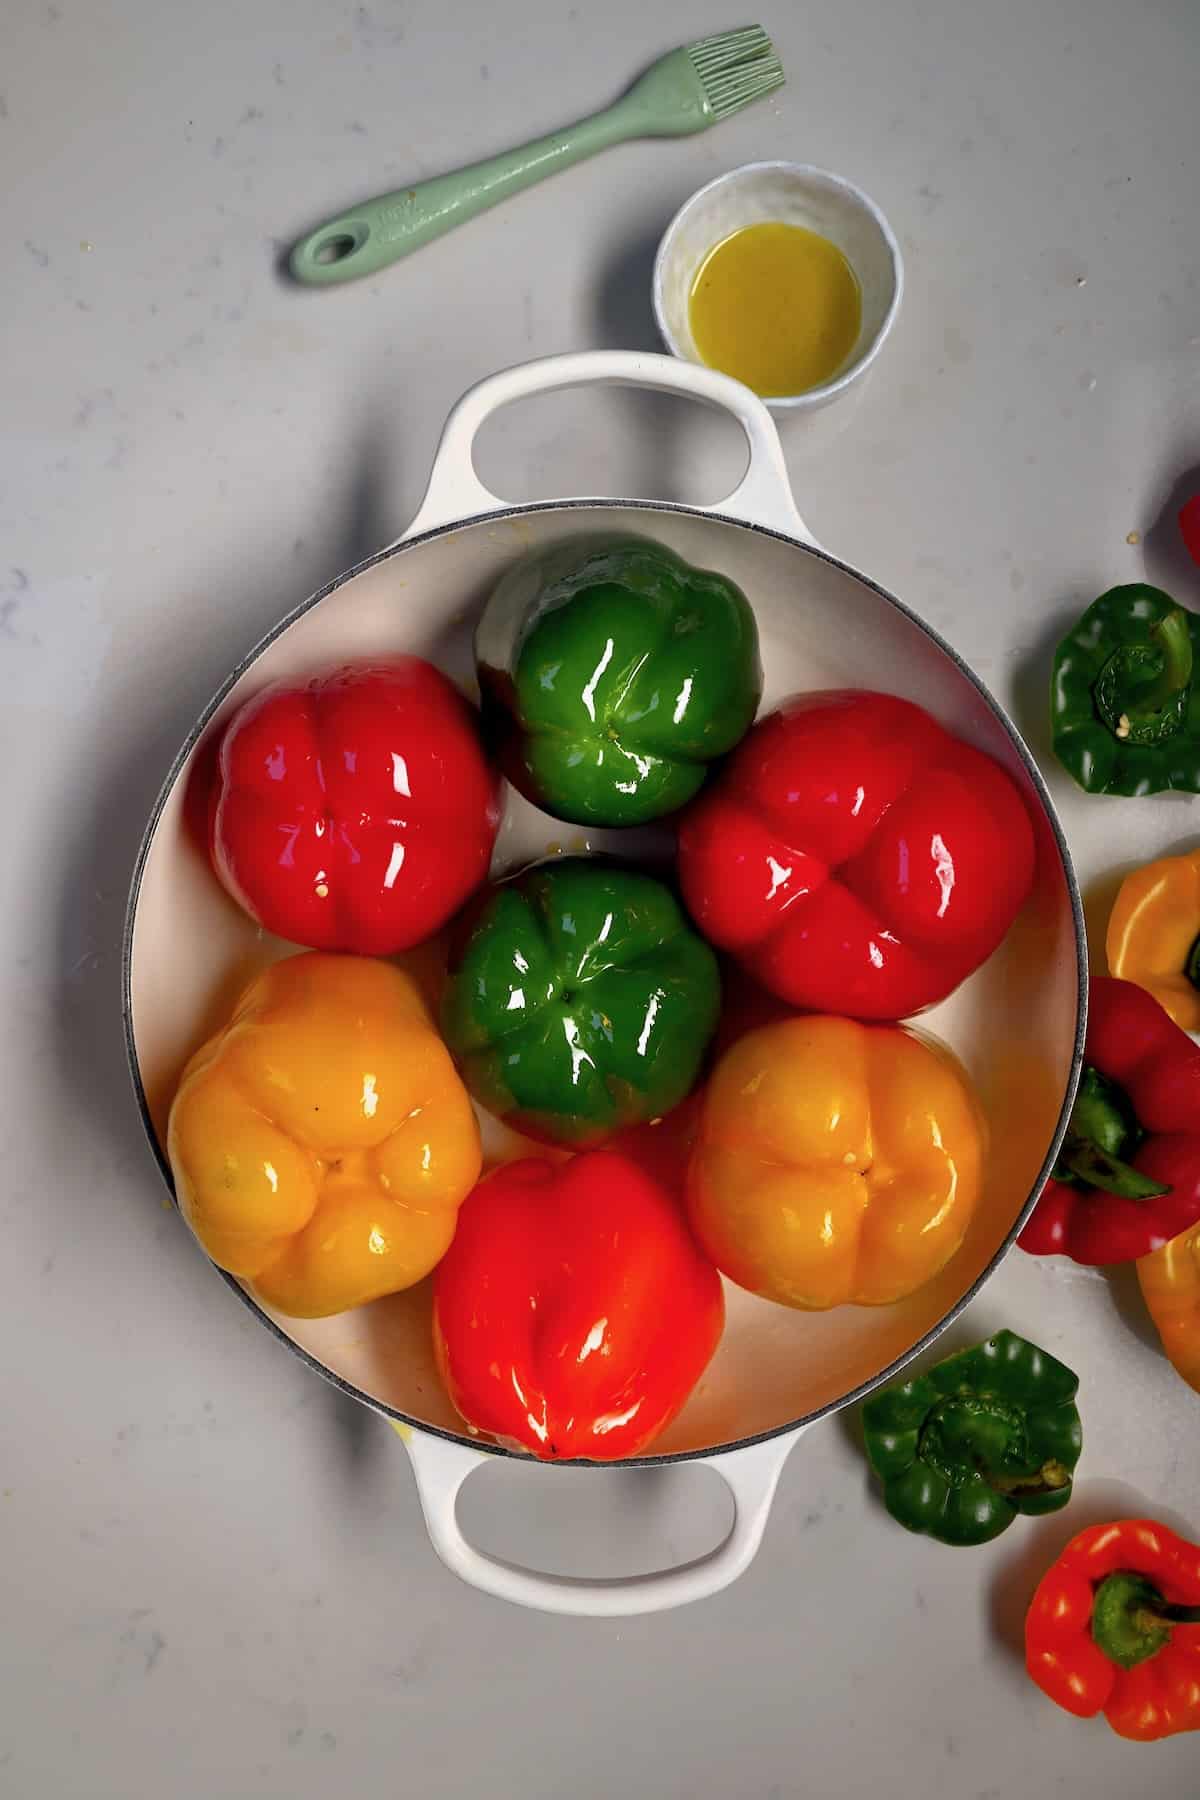 Preparing bell peppers for cooking